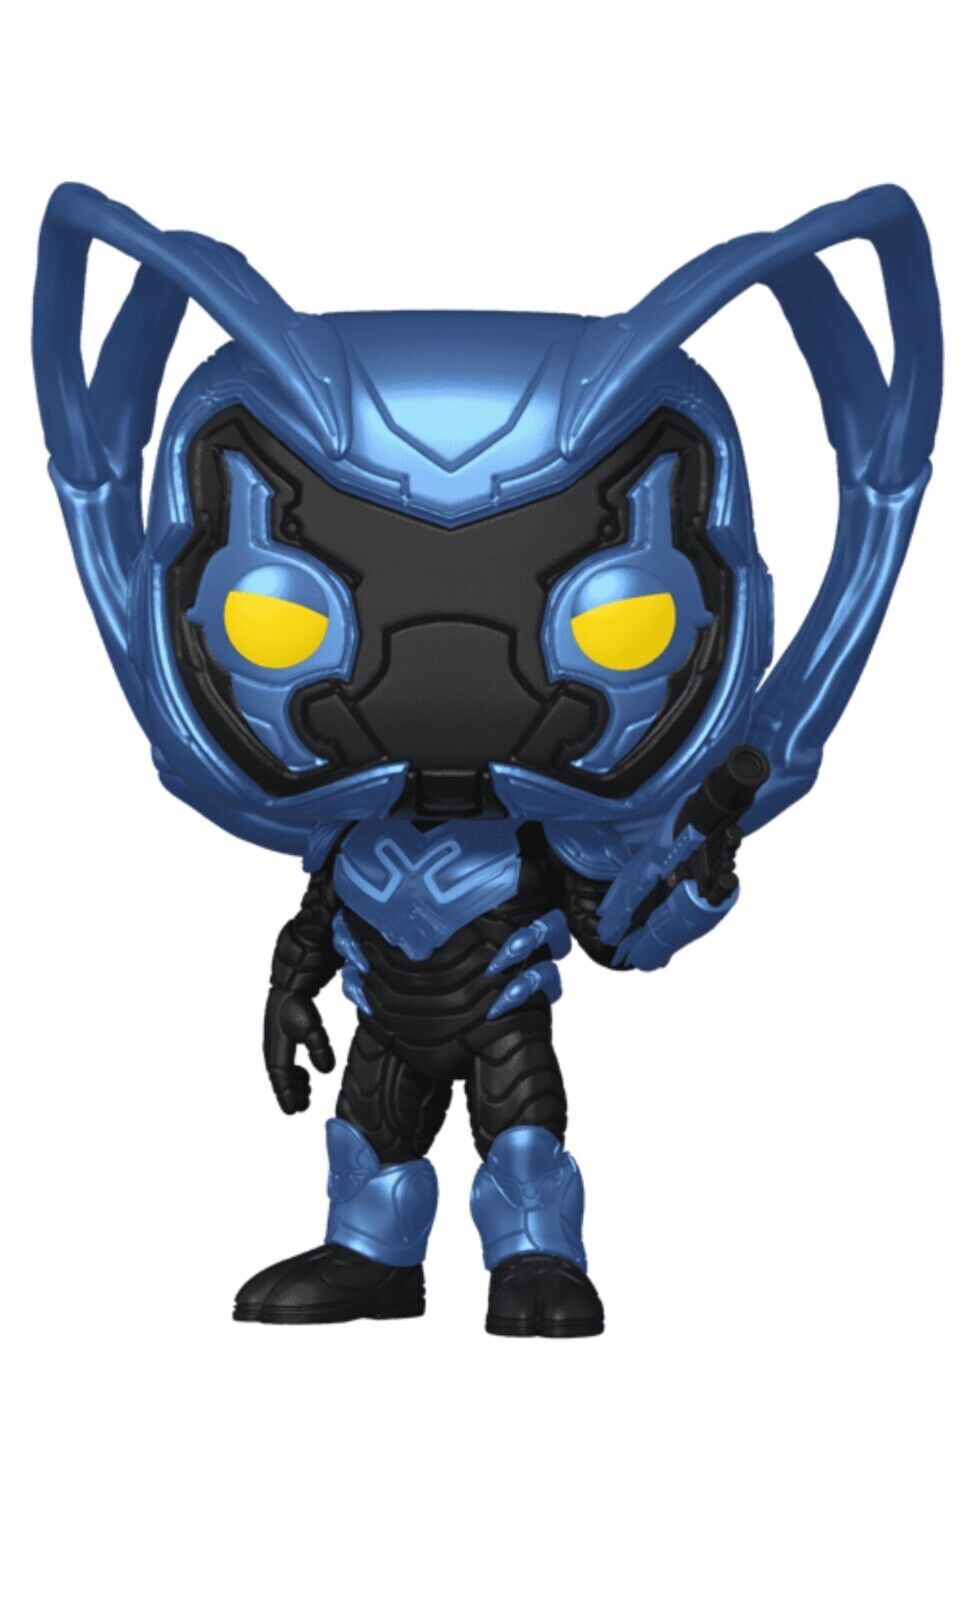 Funko Pop Blue Beetle DC Comics - Blue Beetle, Funko Exclusive - With Protector